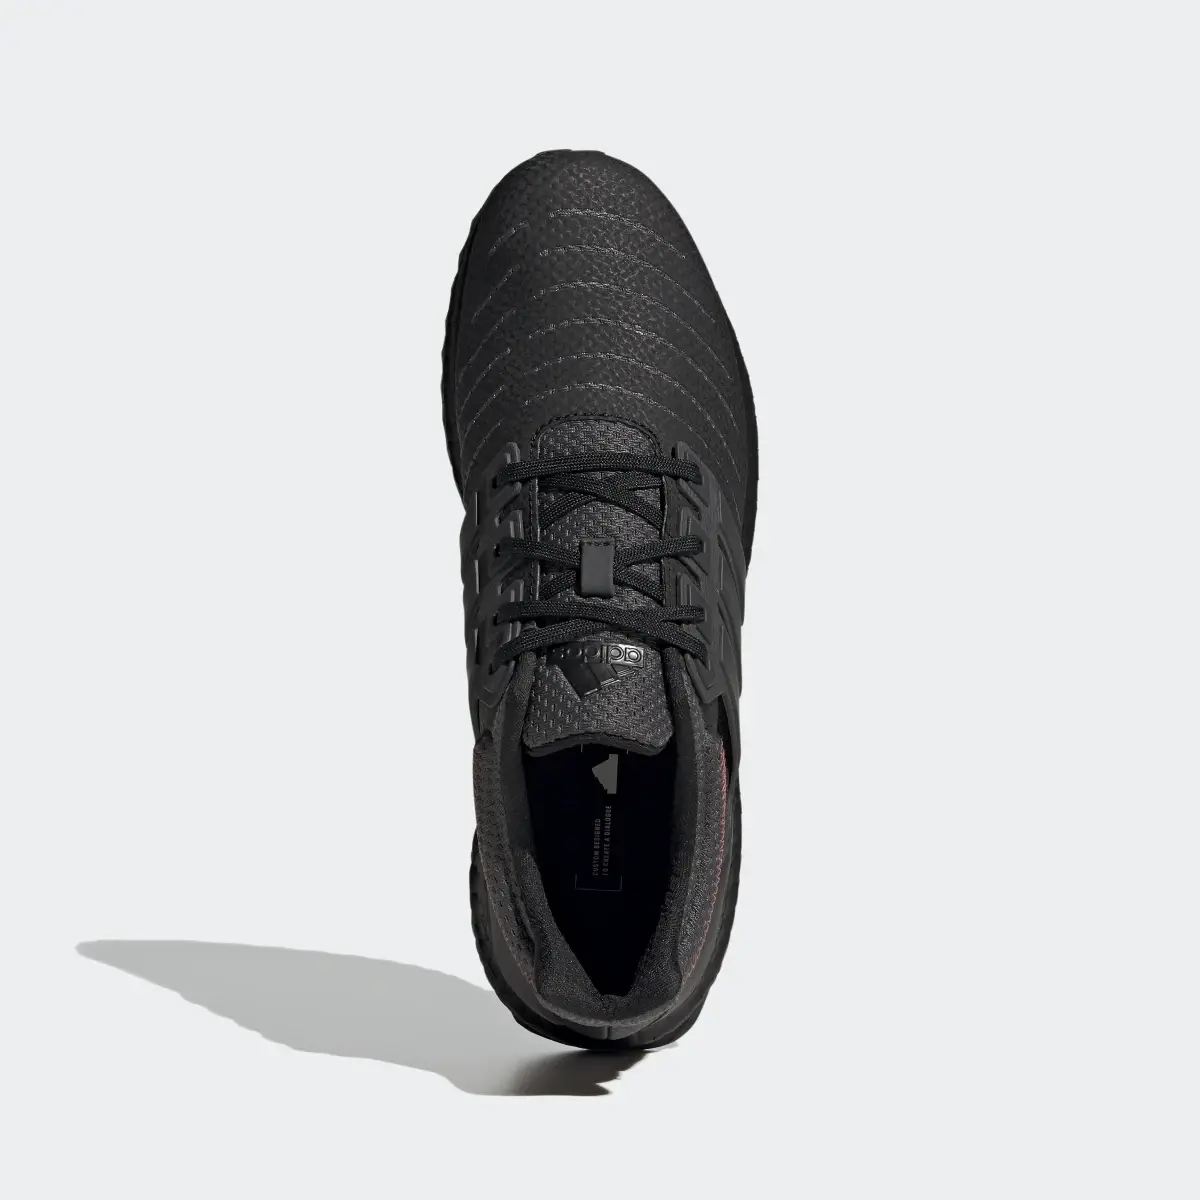 Adidas Ultraboost DNA XXII Lifestyle Running Sportswear Capsule Collection Shoes. 3